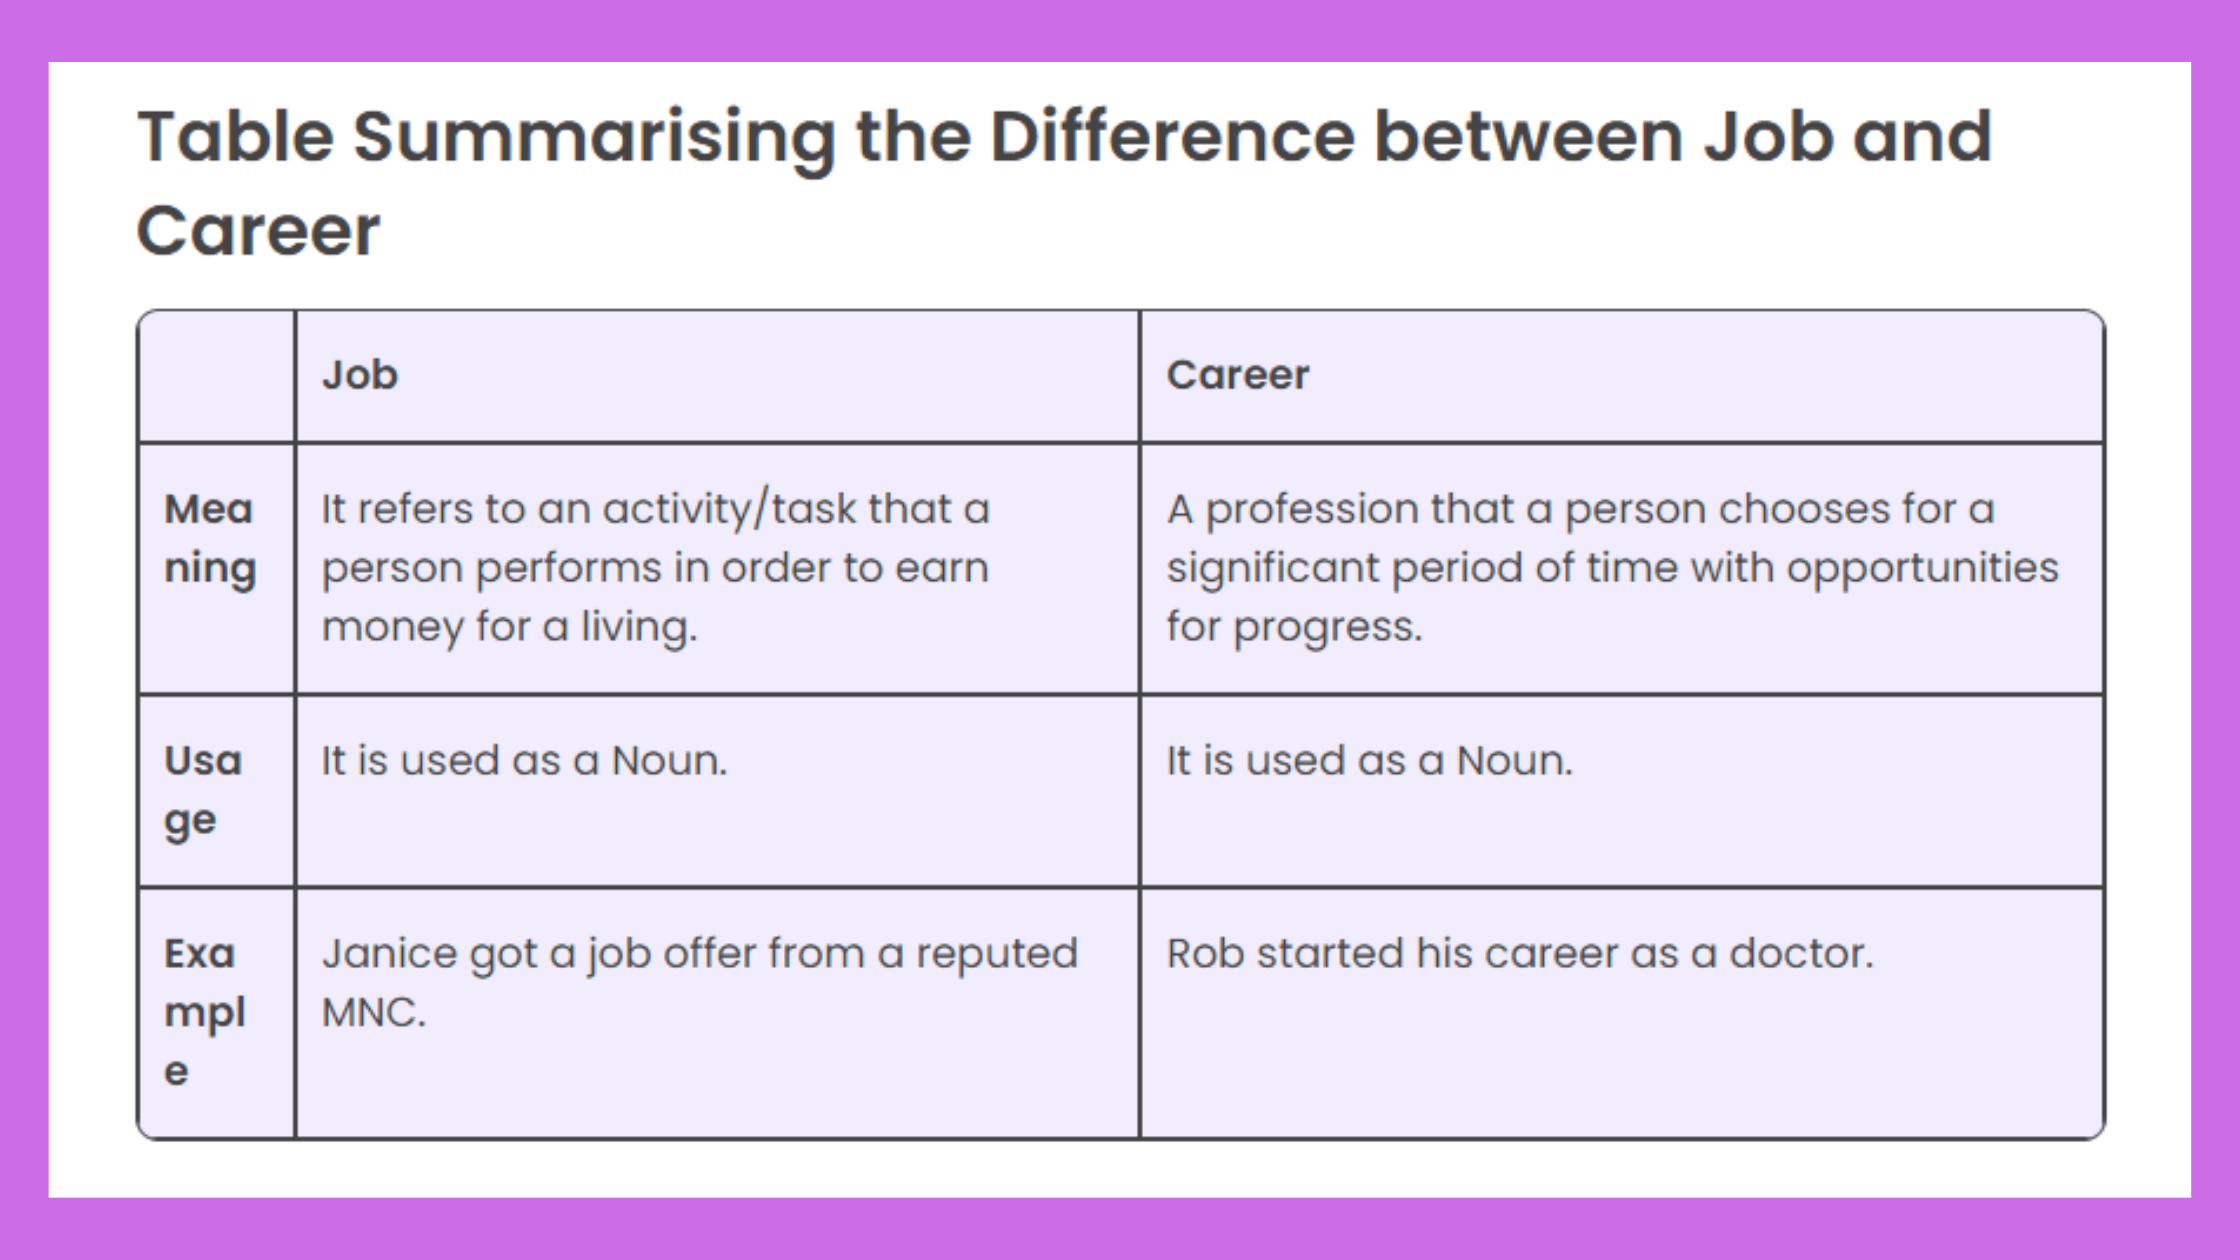 Career vs Job: The Differences